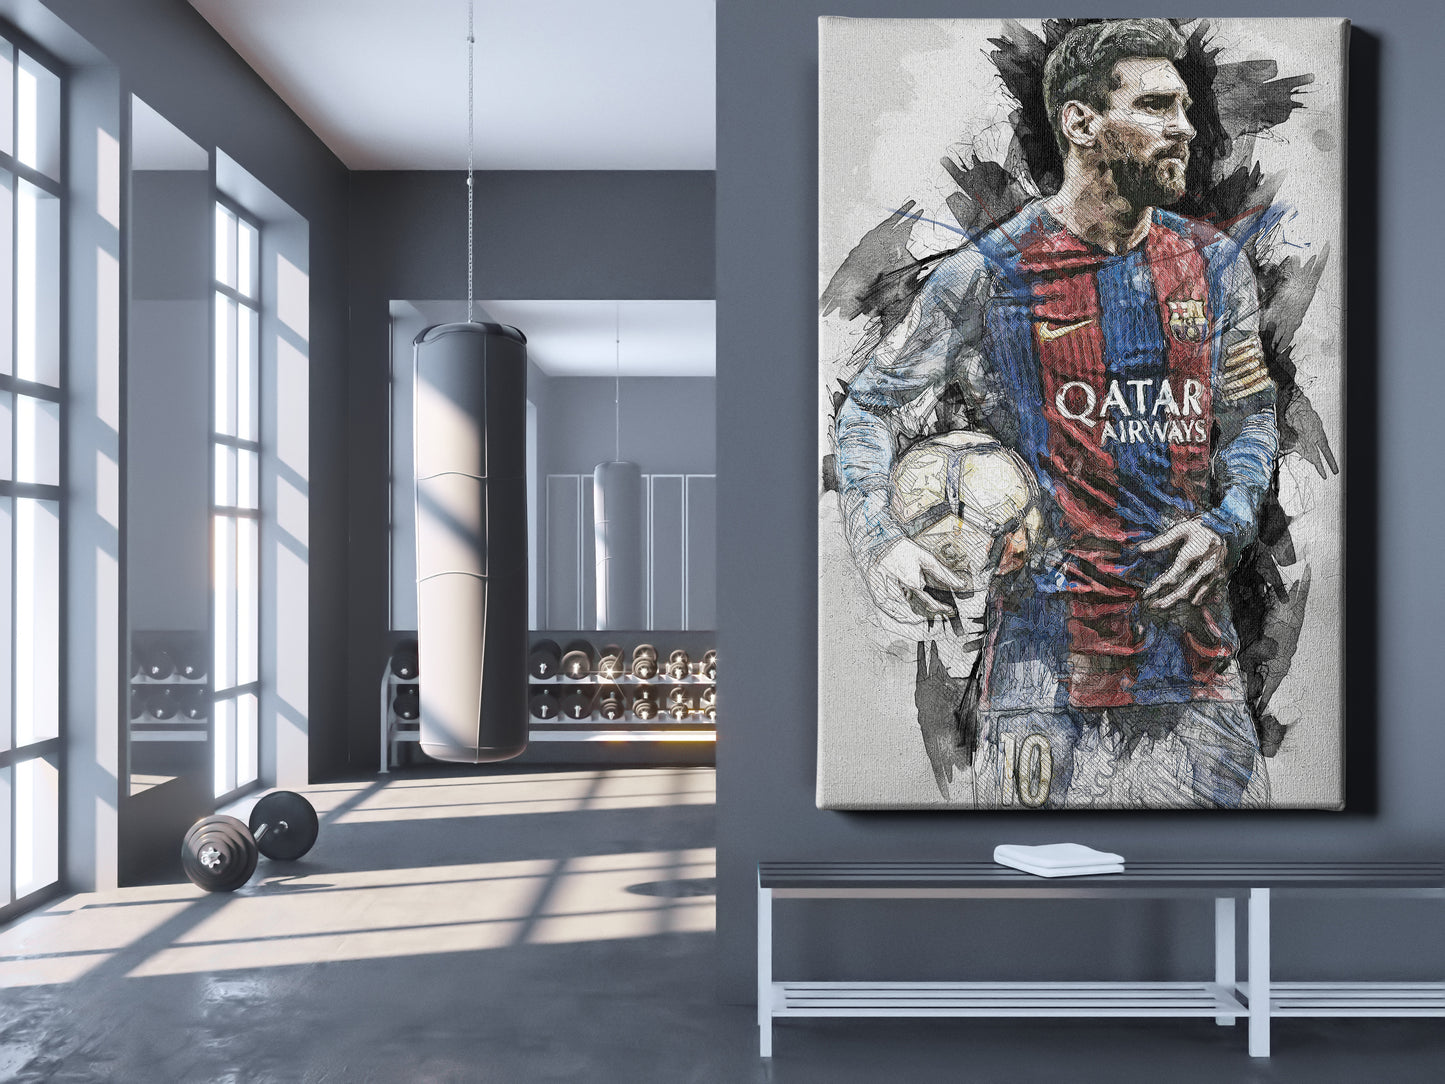 Lionel Messi Poster Barcelona Soccer Player Hand Made Posters Canvas Framed Print Wall Kids Art Man Cave Gift Home Decor